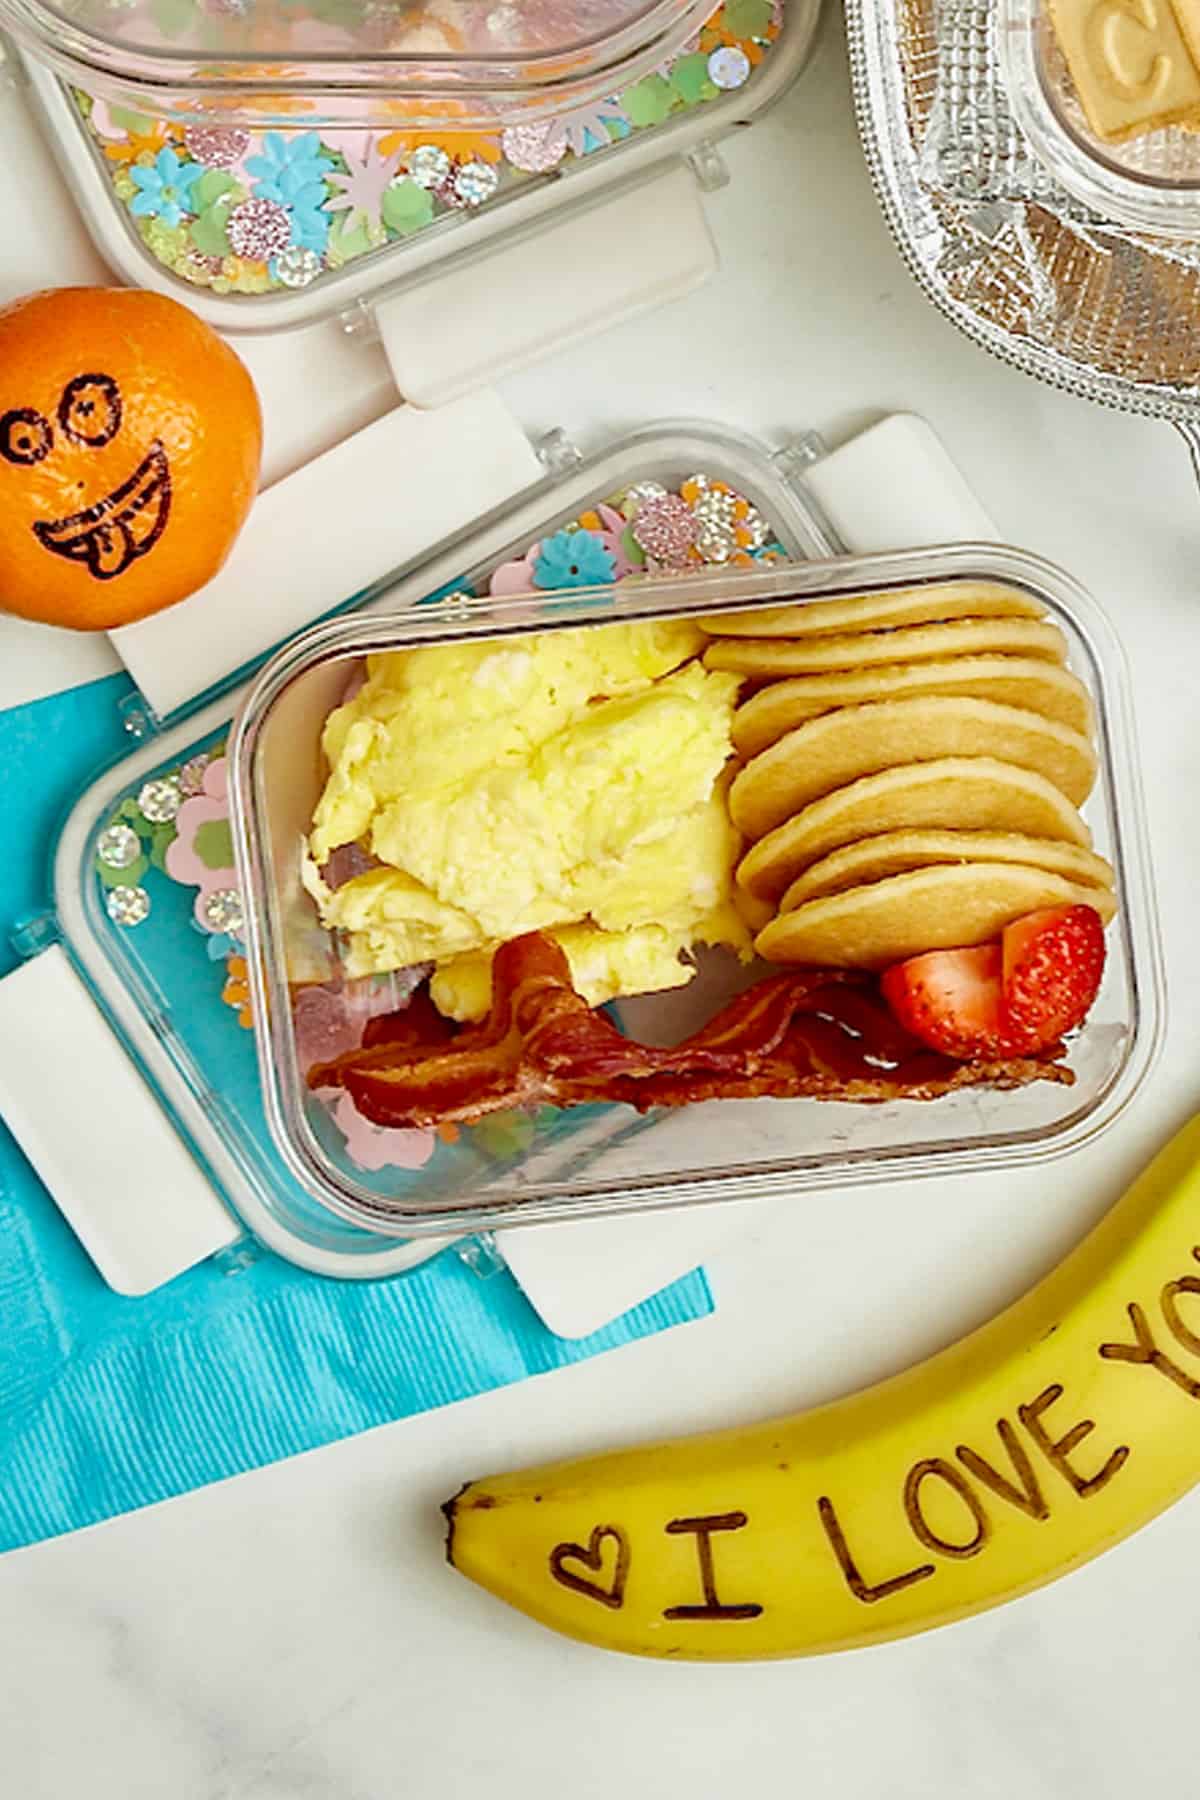 Mini pancakes, scrambled eggs and sliced strawberries in a lunch box.